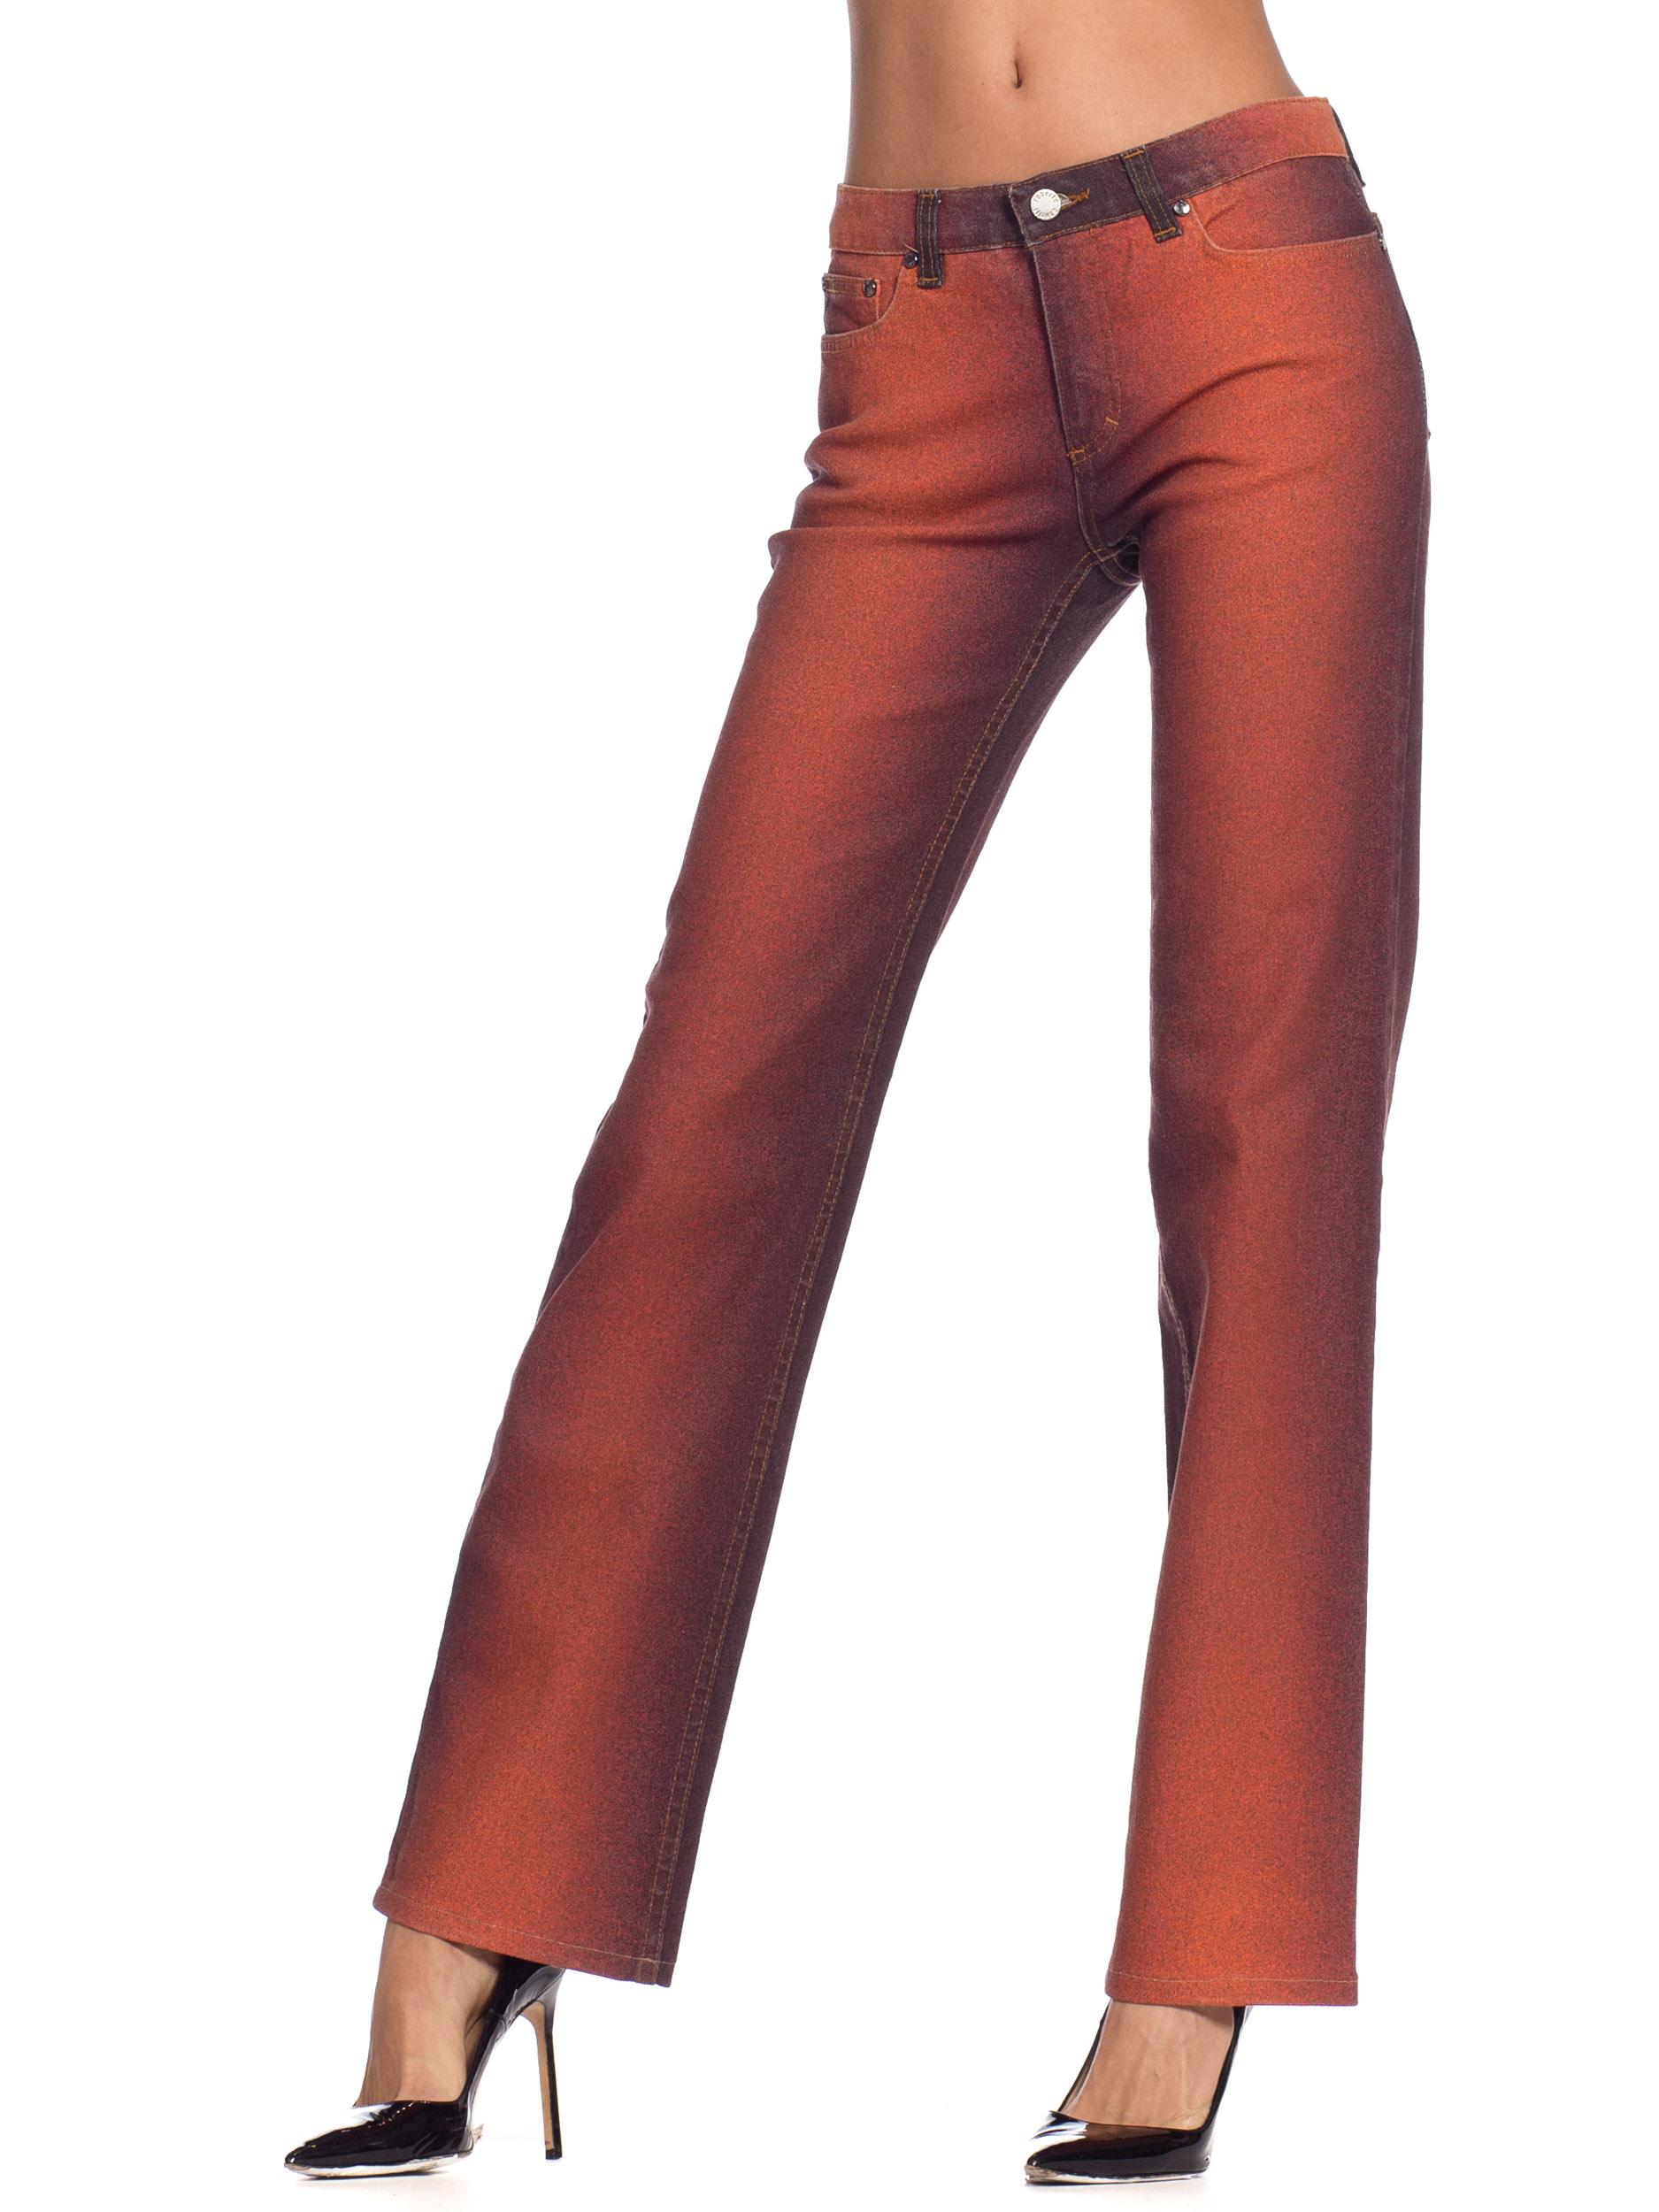 Brown 1990s Low Rise Roberto Cavalli Ombré Stretch Jeans 